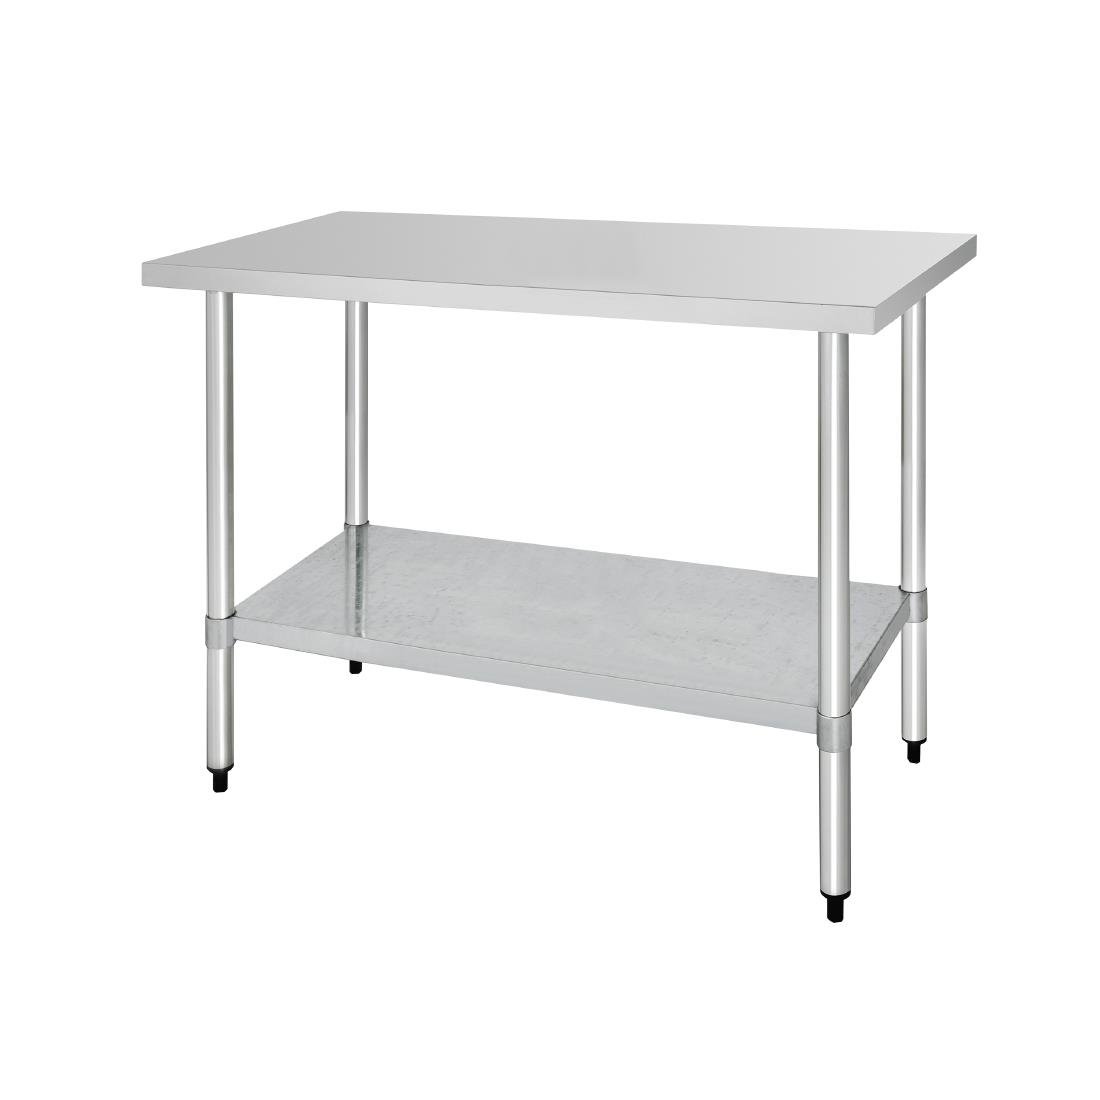 Vogue Stainless Steel Prep Table 600mm (900(H) x 600(W) x 700(D)mm)